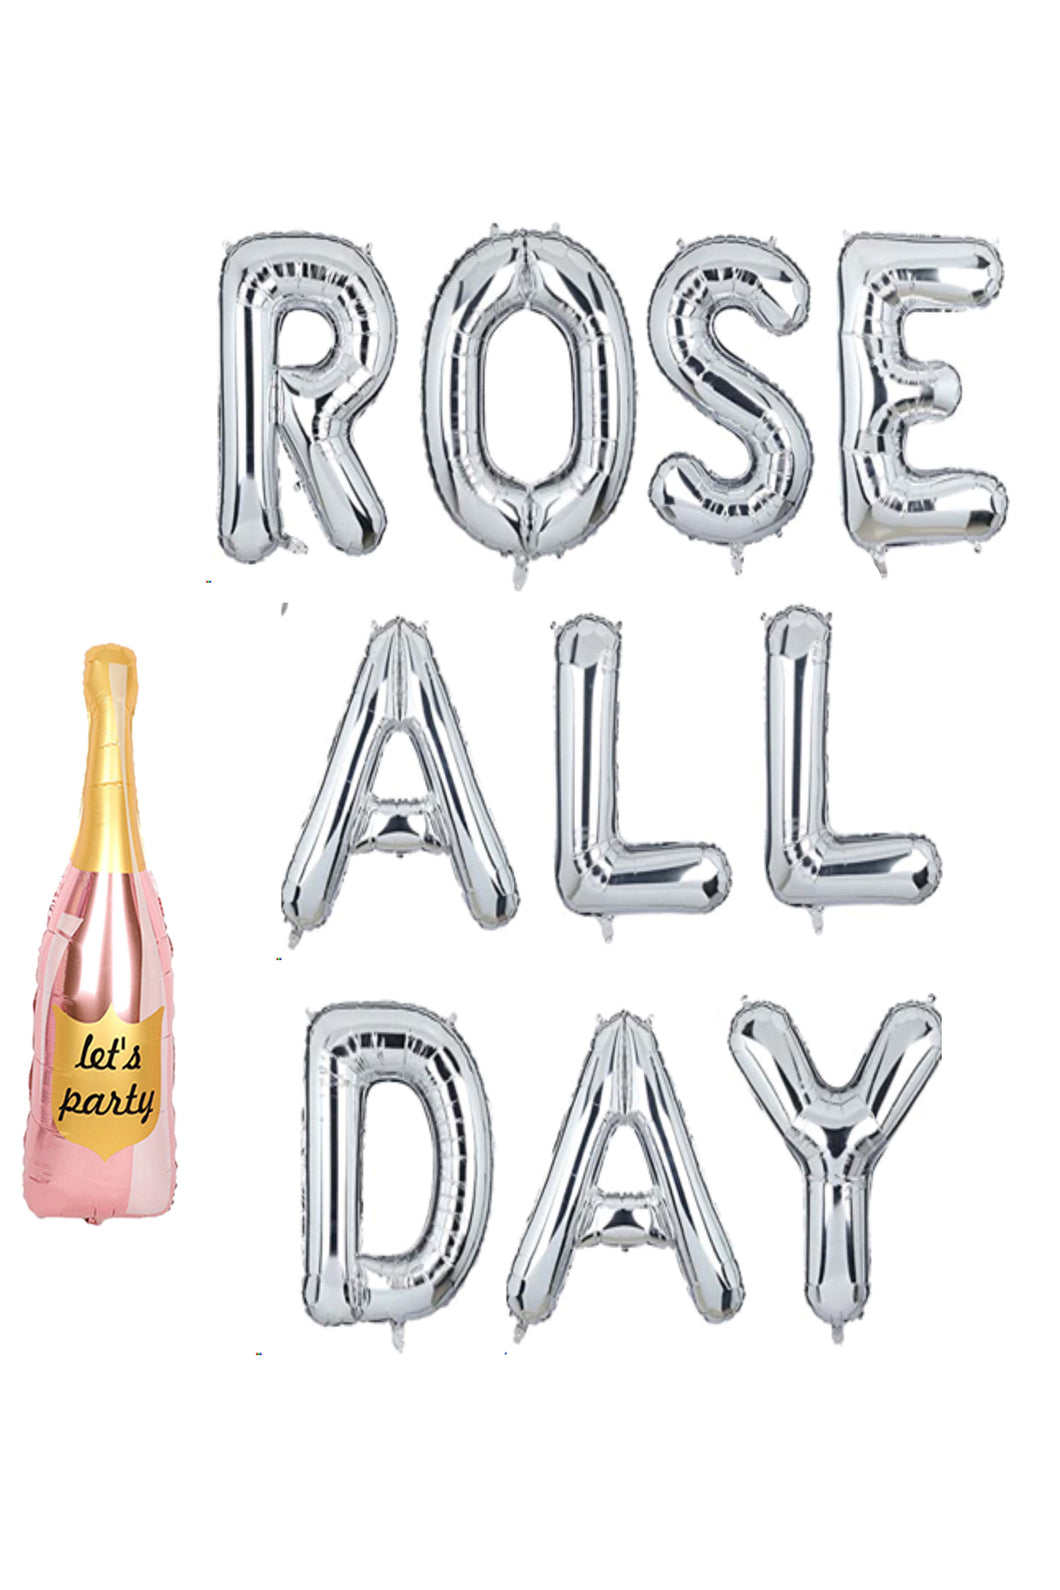 Rose all day balloons